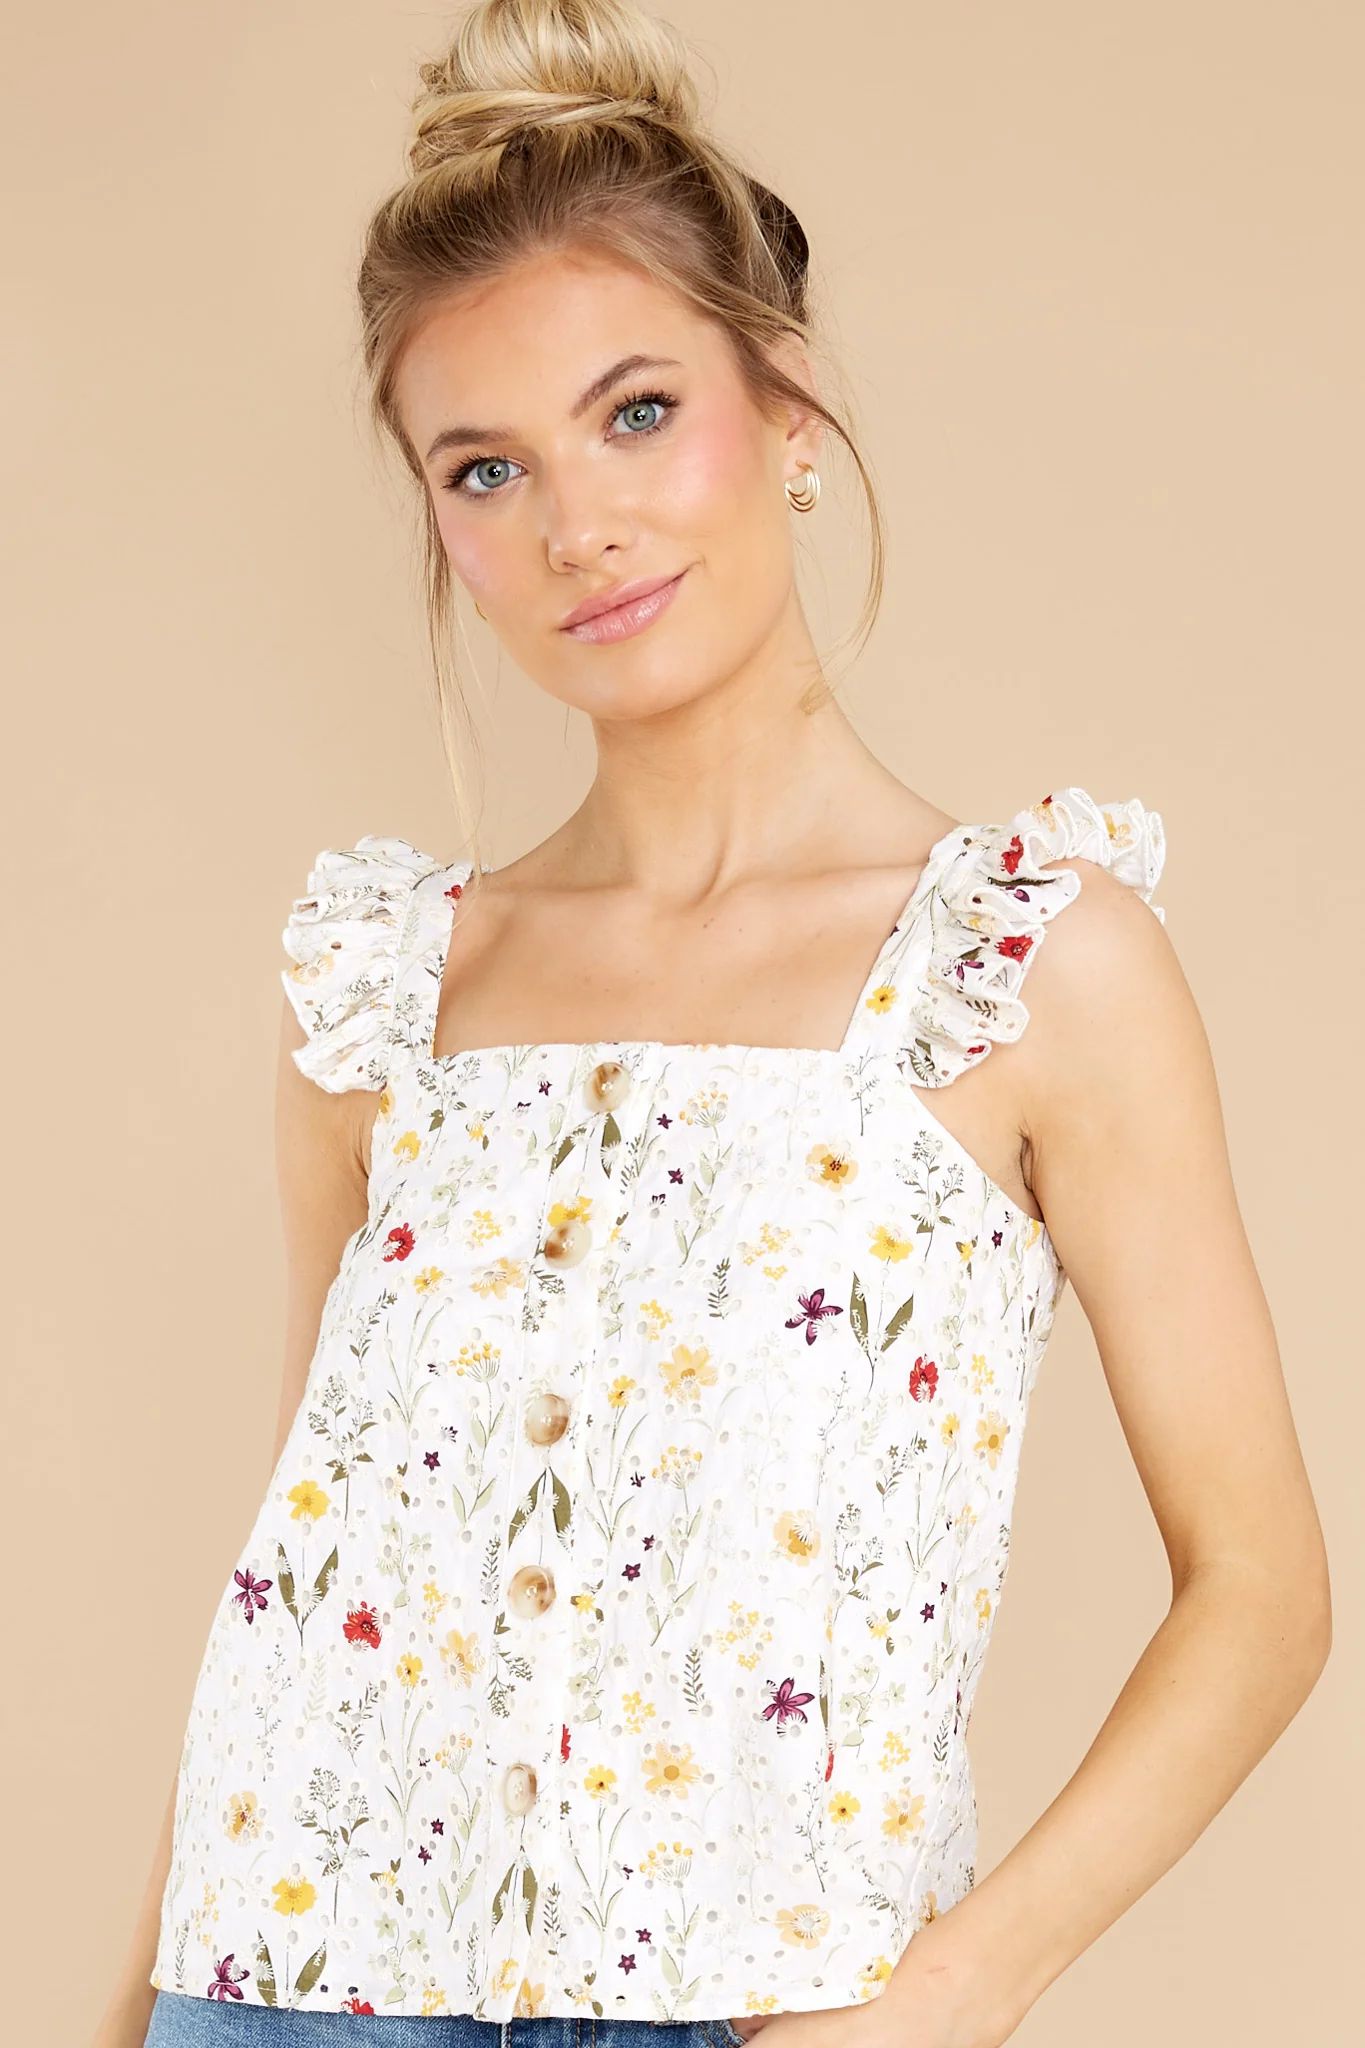 Spread Joy White Embroidered Floral Top | Red Dress 